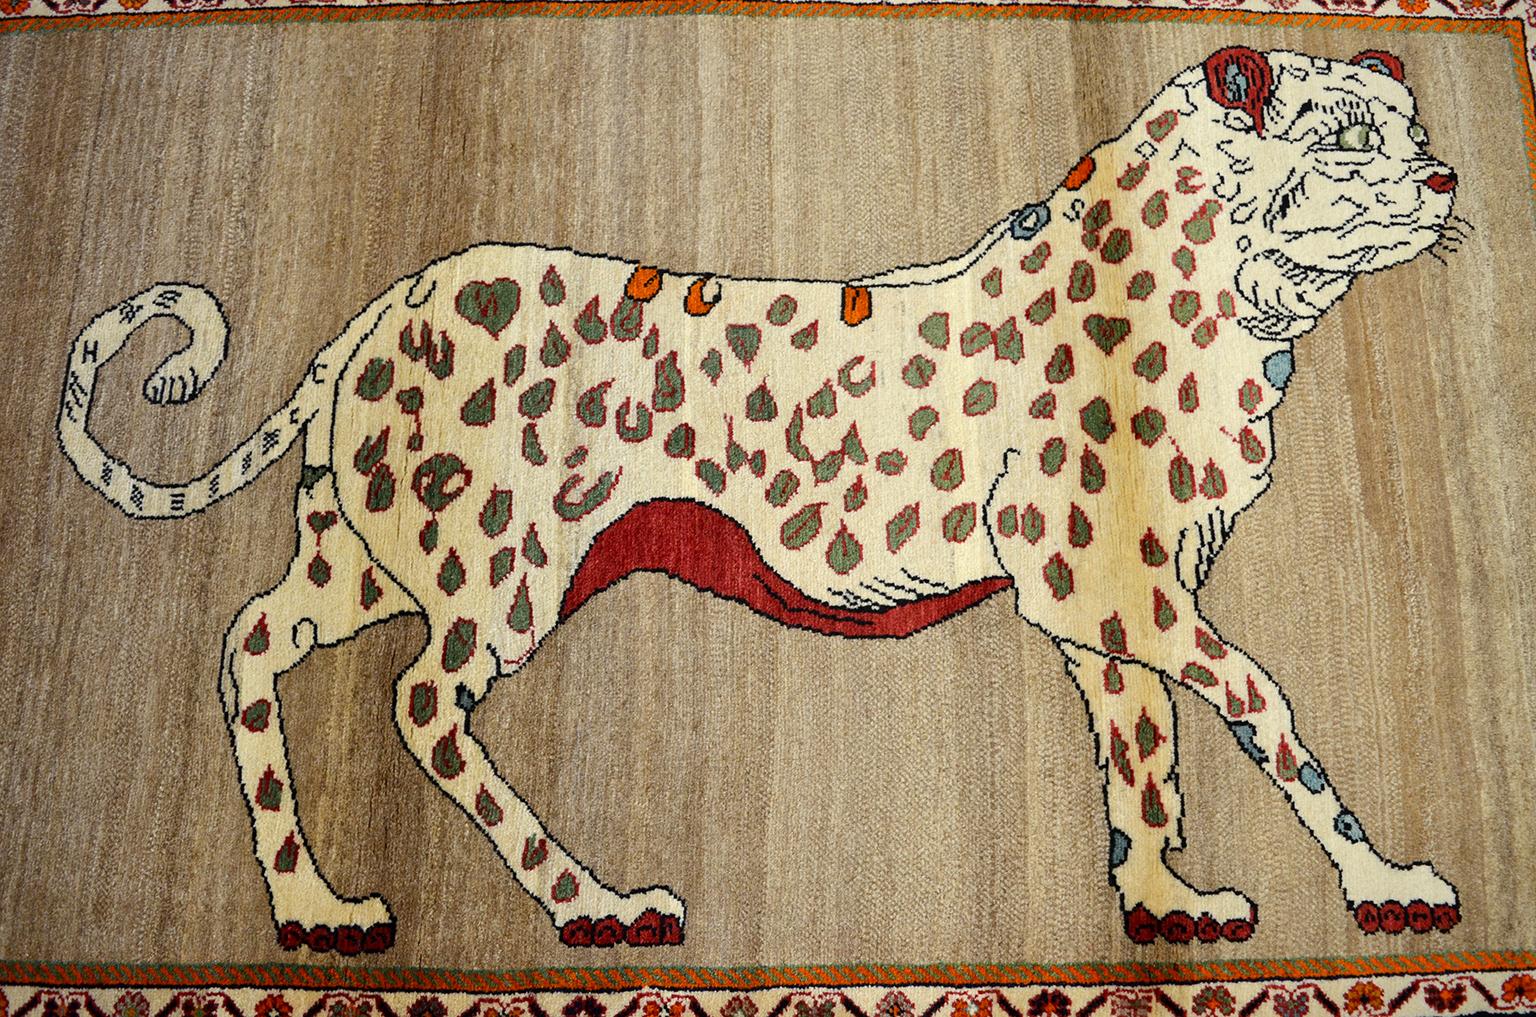 This vintage Persian Qashqai leopard animal carpet, circa 1930 in pure handspun wool and organic vegetable dyes has a unique coloration of undyed cream, beige and gray wools and contrasting dyed red, burgundy and light blue tones. The leopard’s